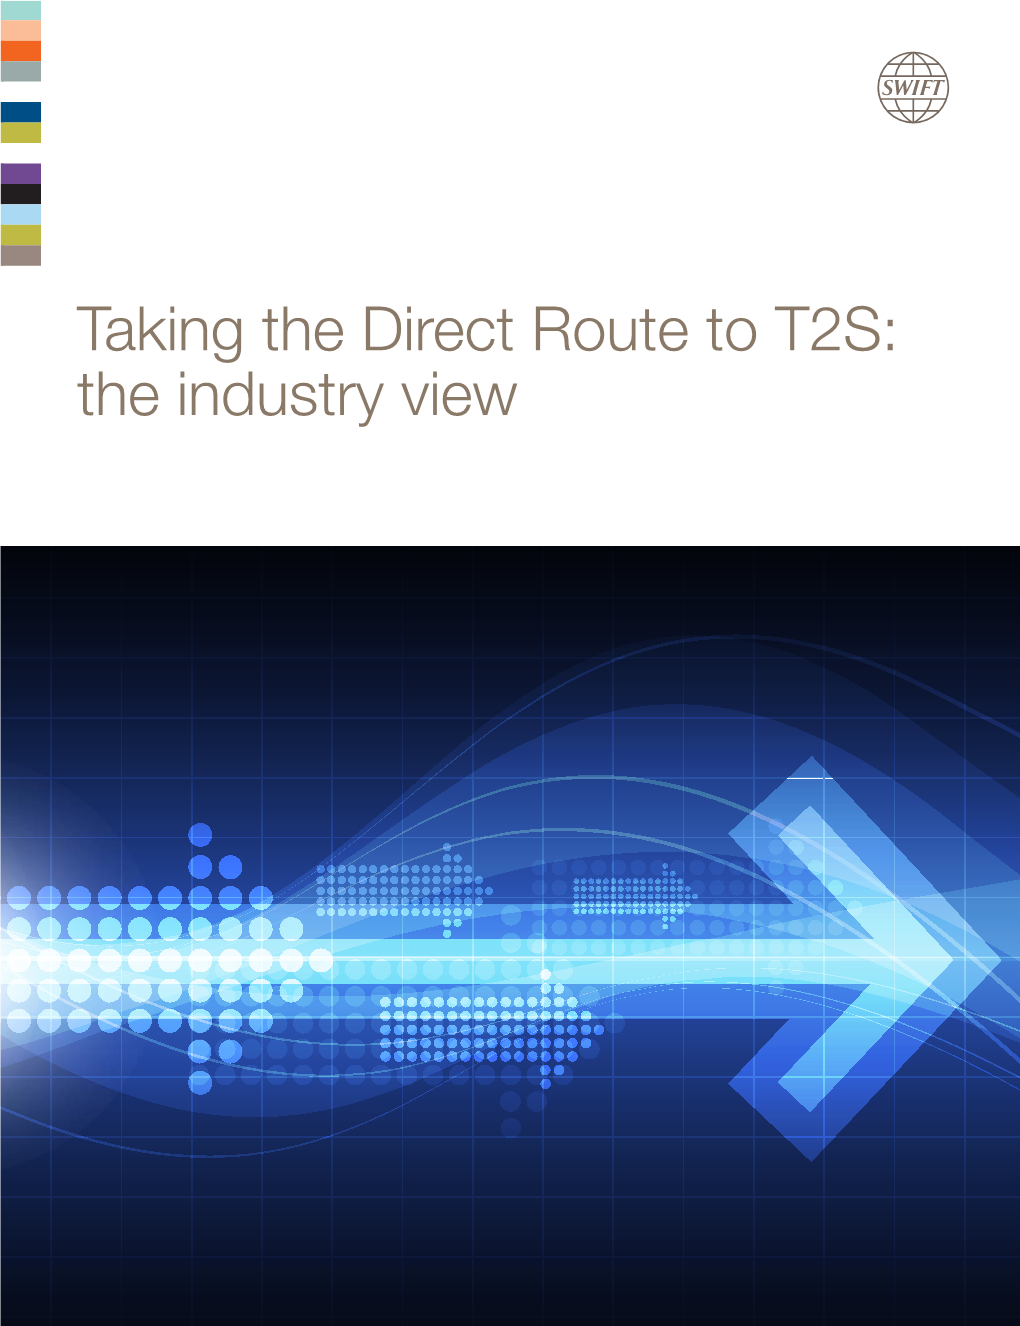 Taking the Direct Route to T2S: the Industry View